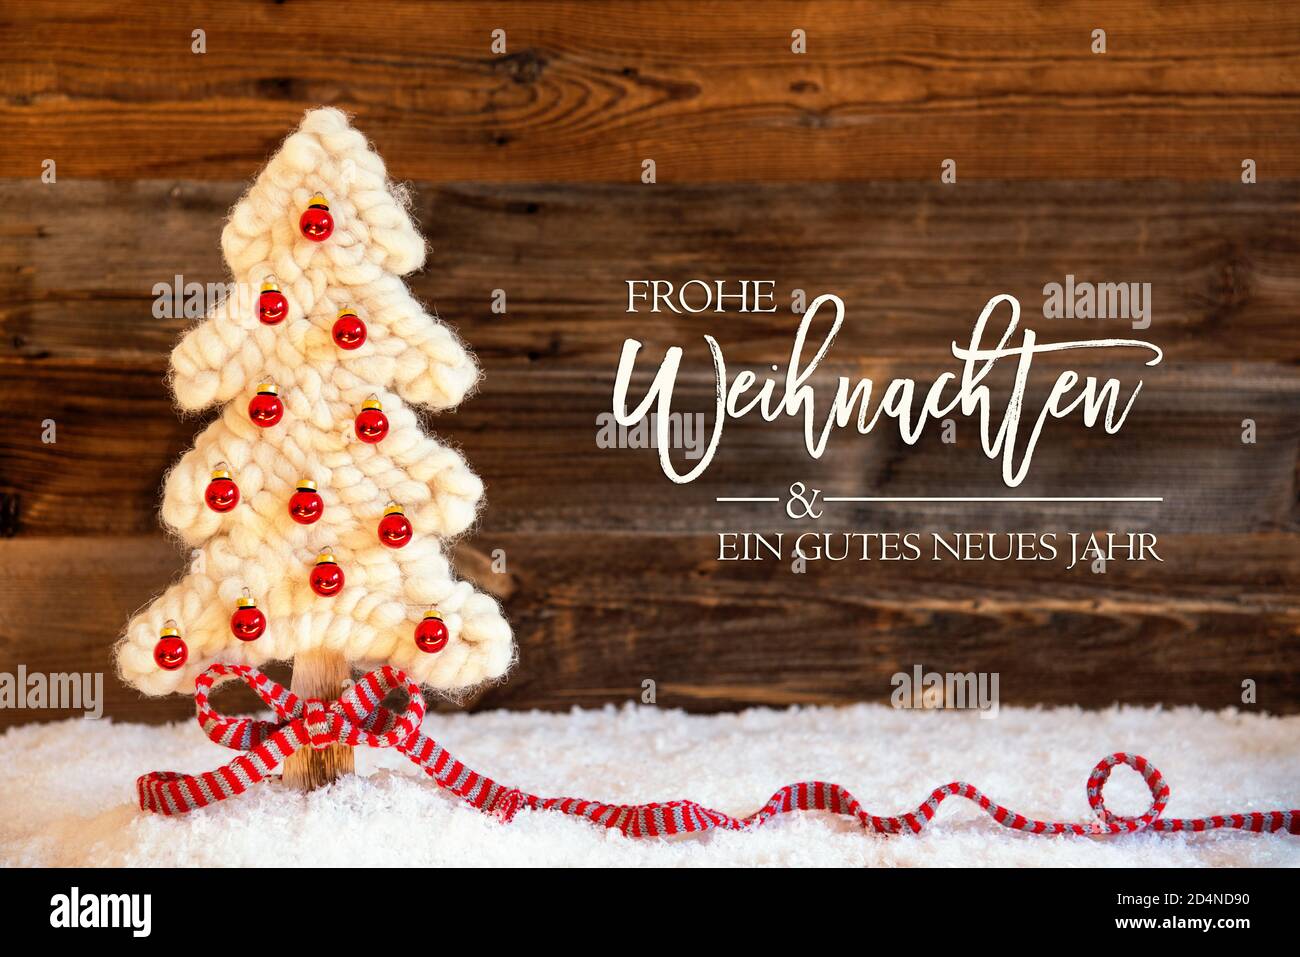 Fabric Christmas Tree, Ball, Snow, Gutes Neues Jahr Means Happy New Year Stock Photo